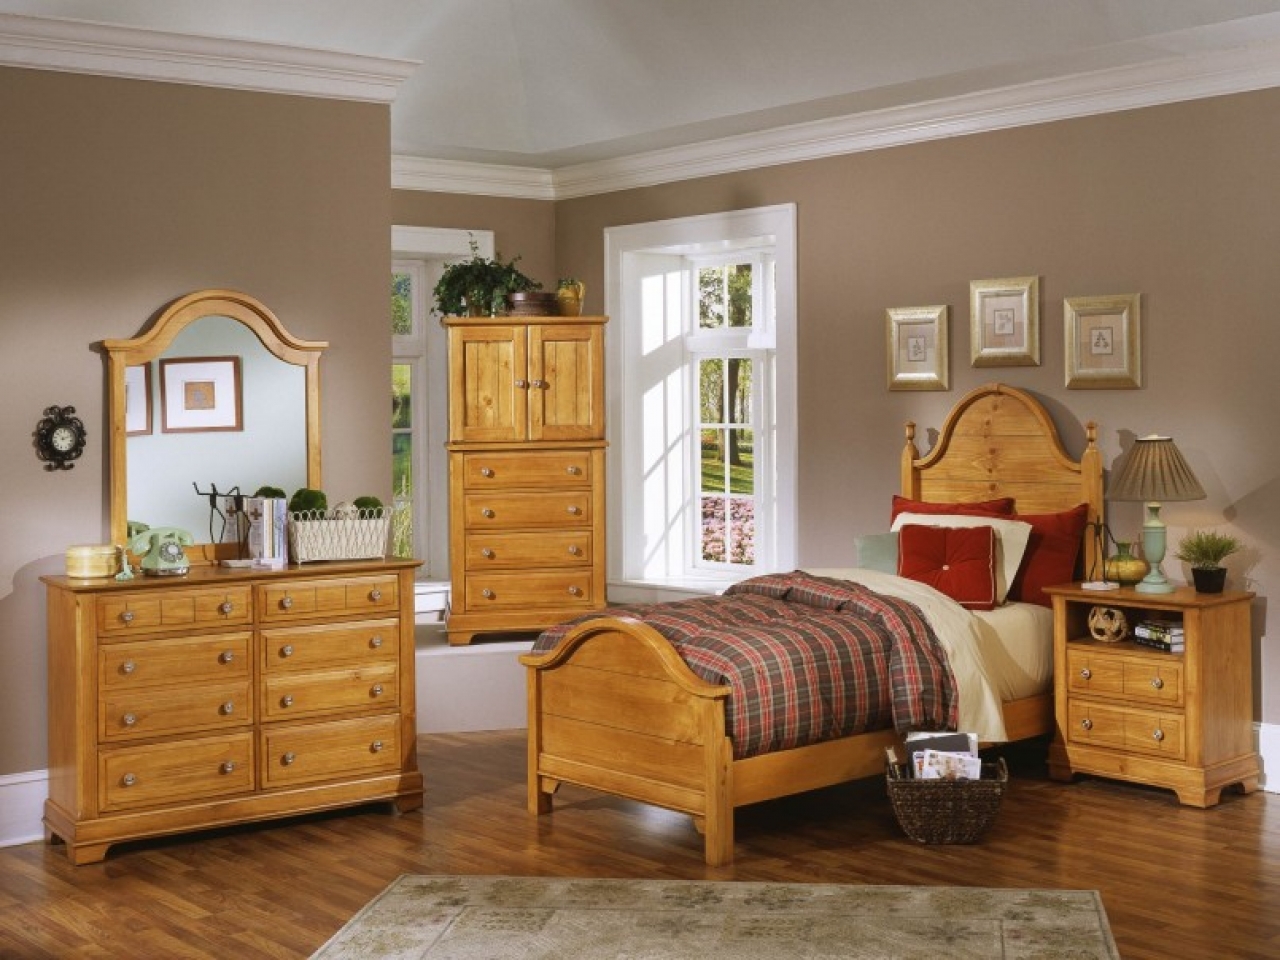 bedroom ideas with pine furniture photo - 2